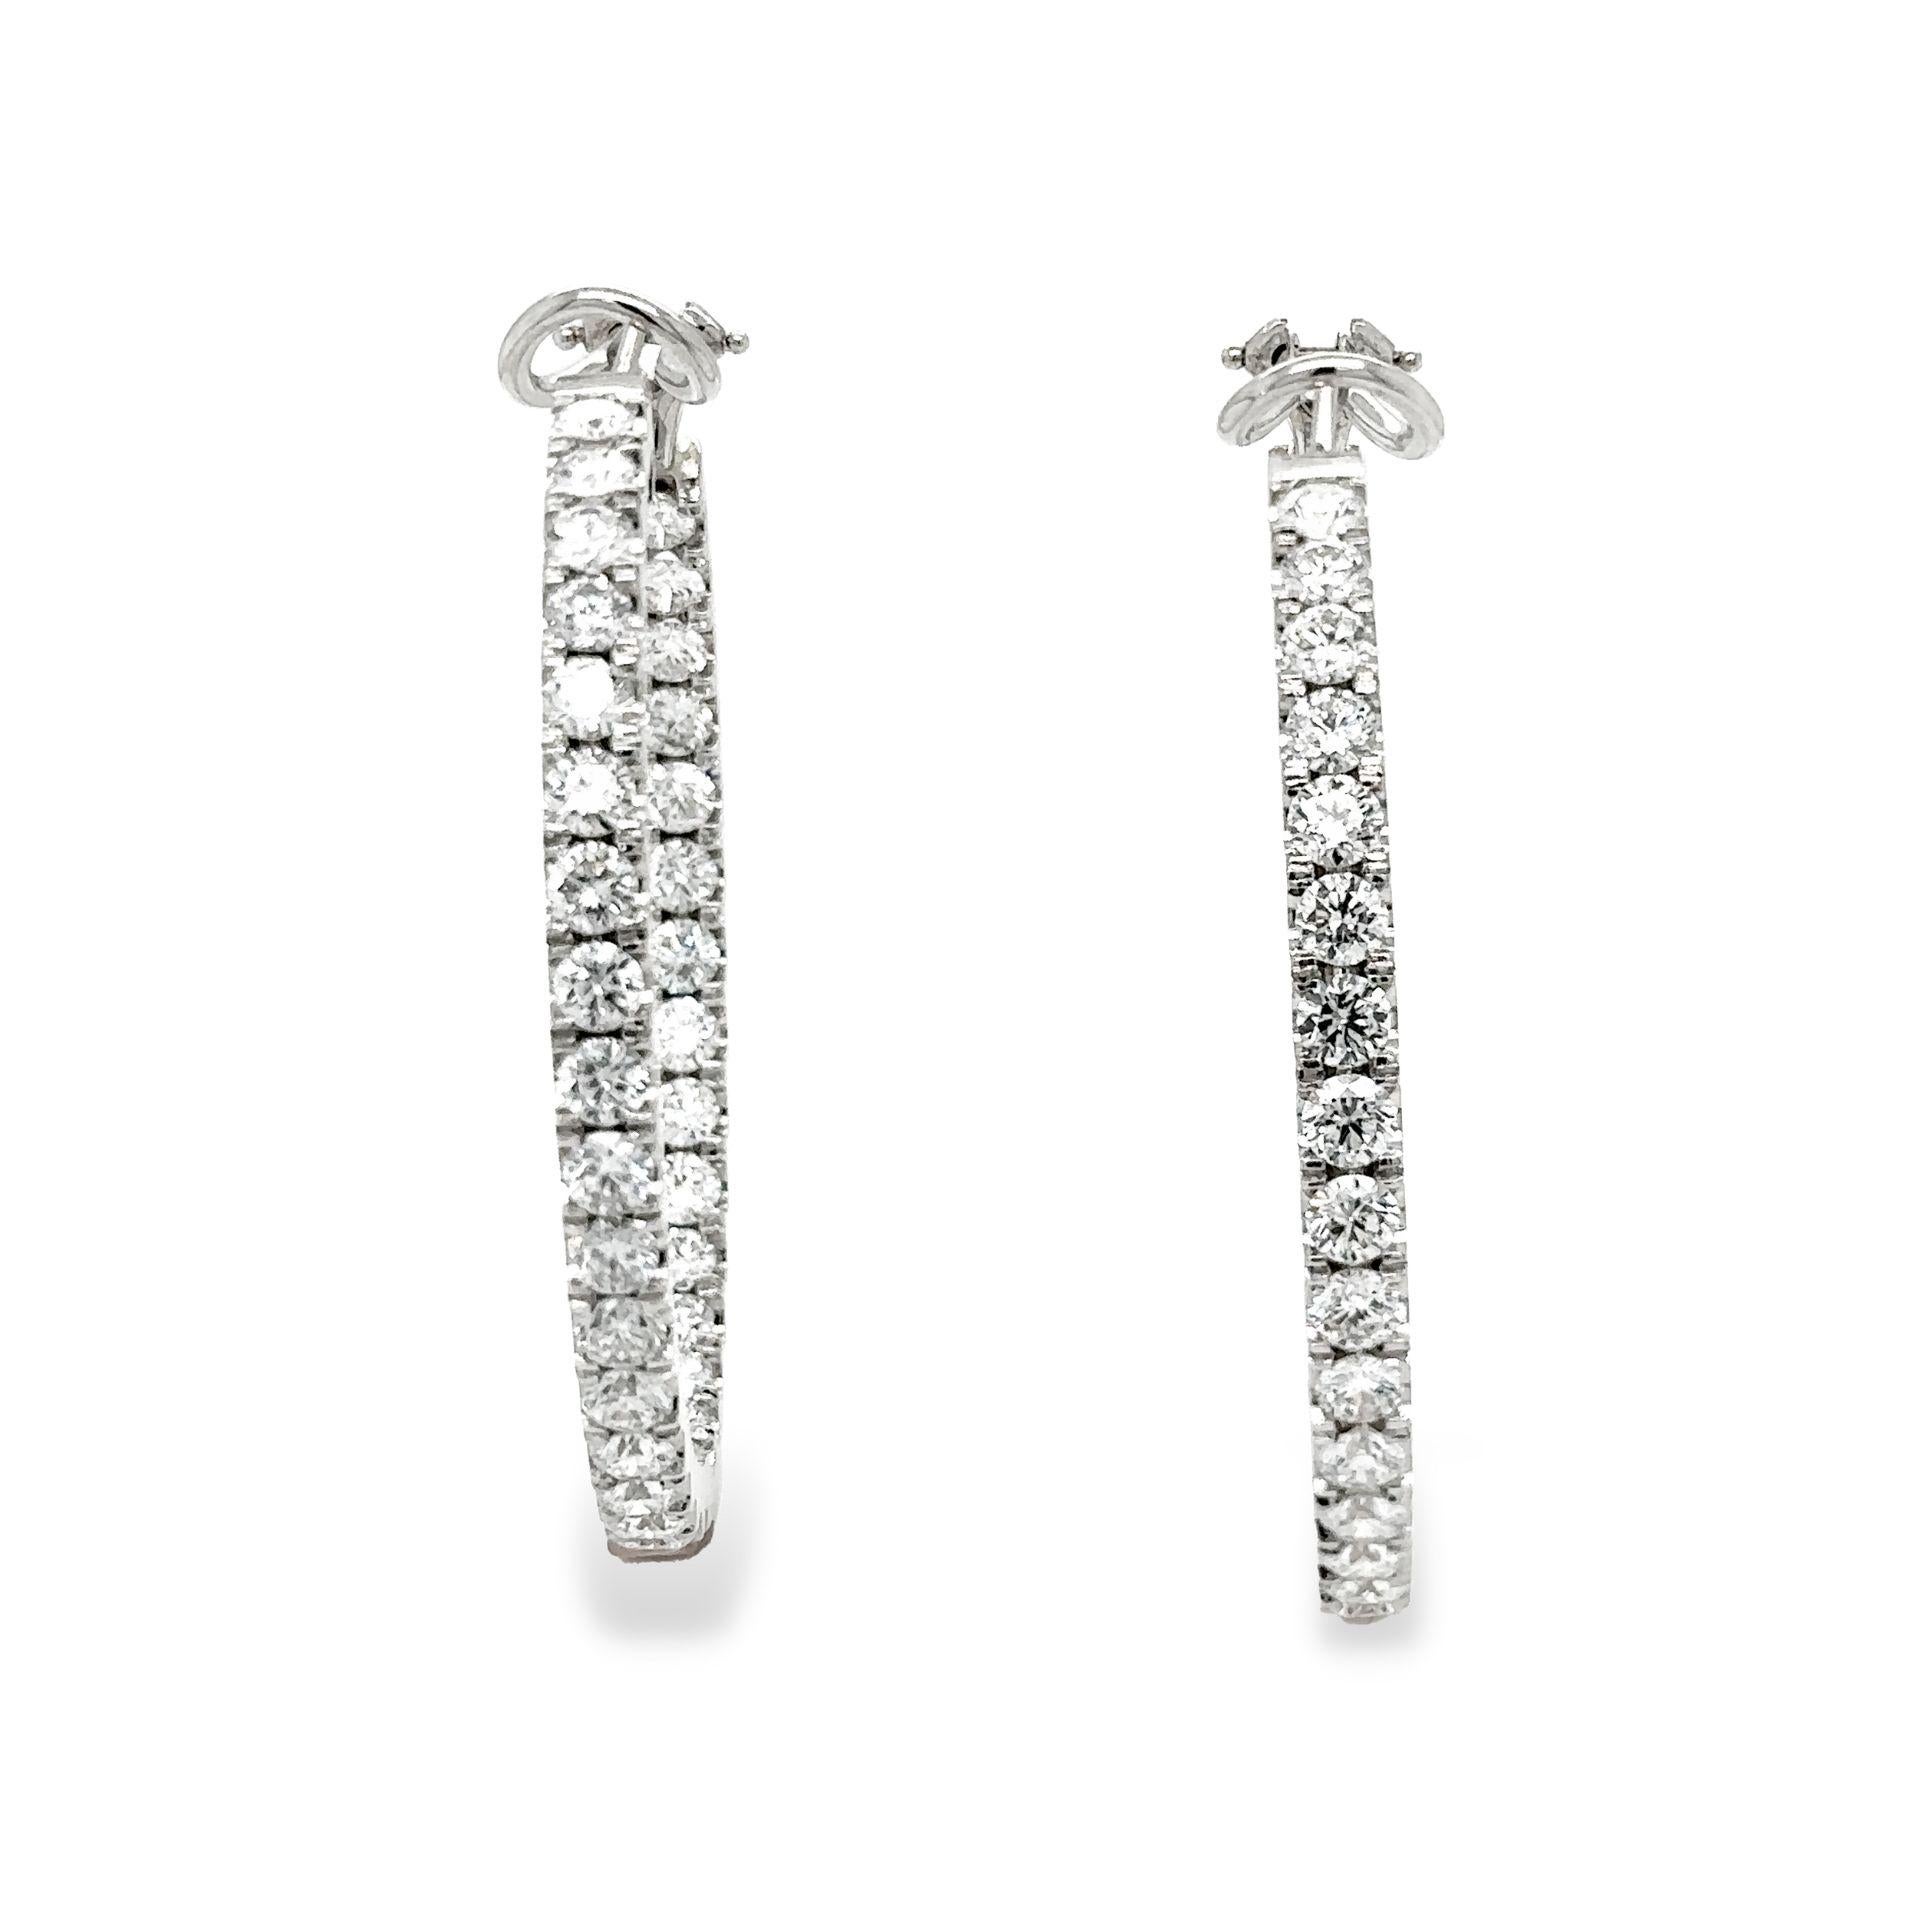 Diamond Hoop Earrings 18K White Gold 7.40 carats

Inside-Outside Hoop Earrings

STUNNING!!!

With 66 Round Brilliant Cut Diamonds, 11 pointers each

Total Carat Weight of Diamonds 7.40 carats

Diamonds are D E  in Color and VVS/VS in Clarity

Hoop